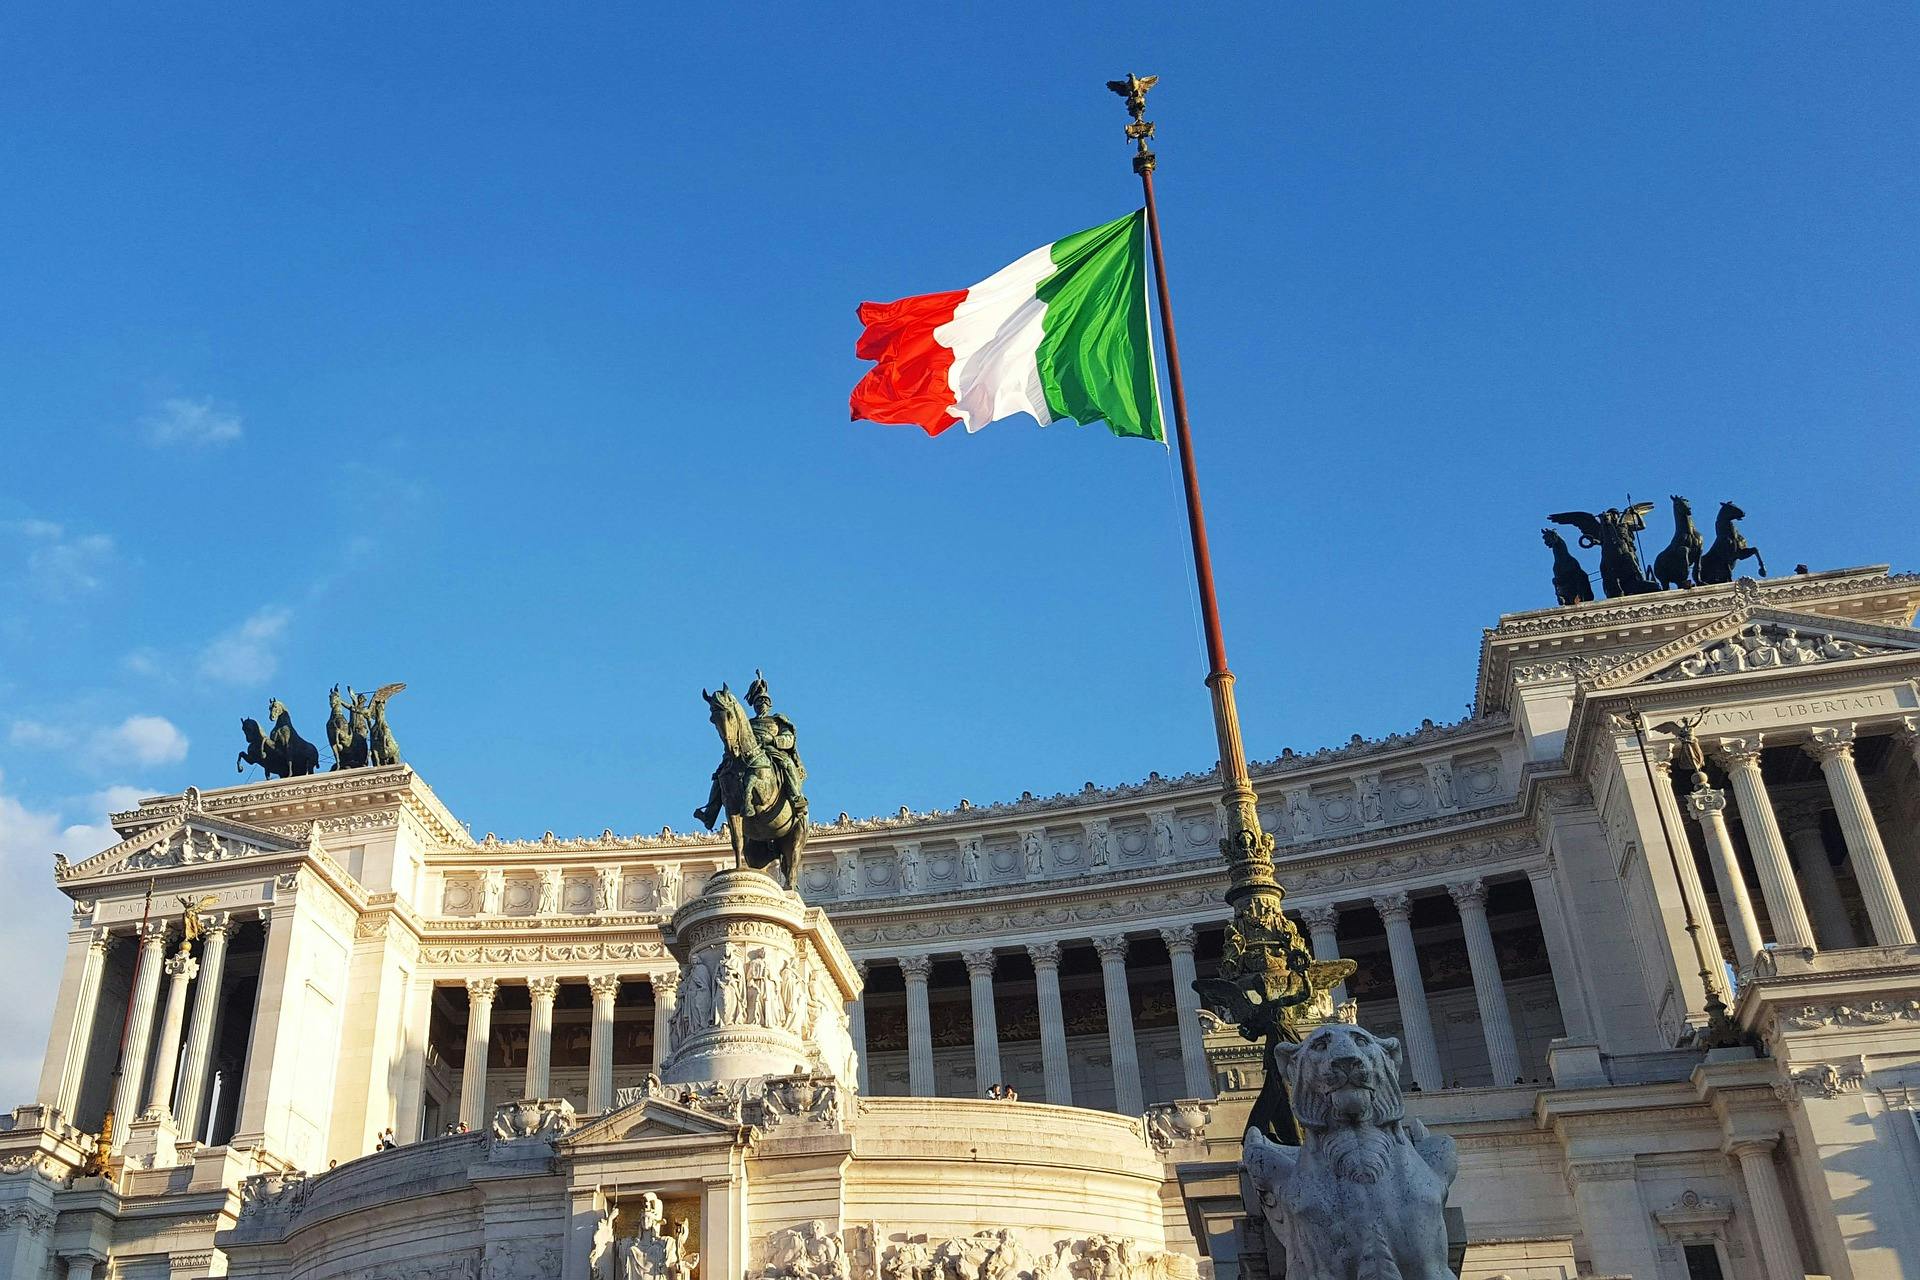 Moving from Canada to Italy Illustration. Rome & Italian Flag.